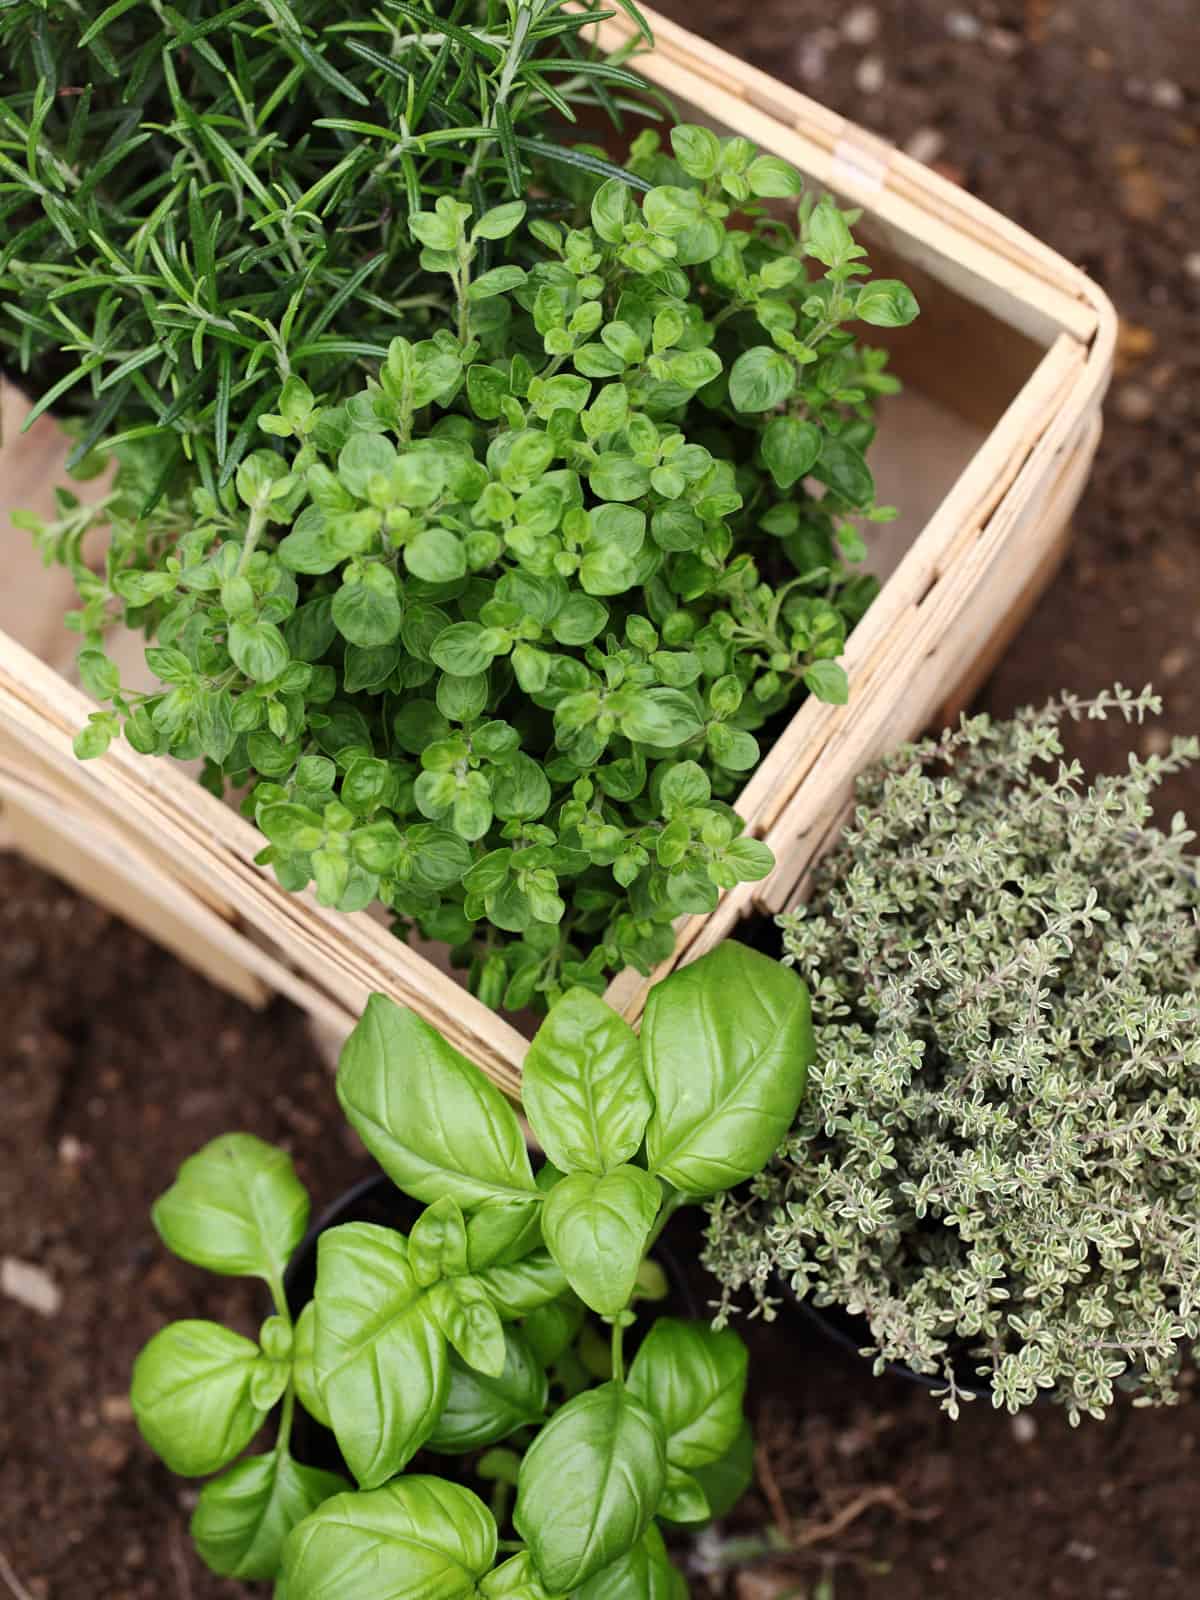 healthy and newly harvested Oregano placed in a basket